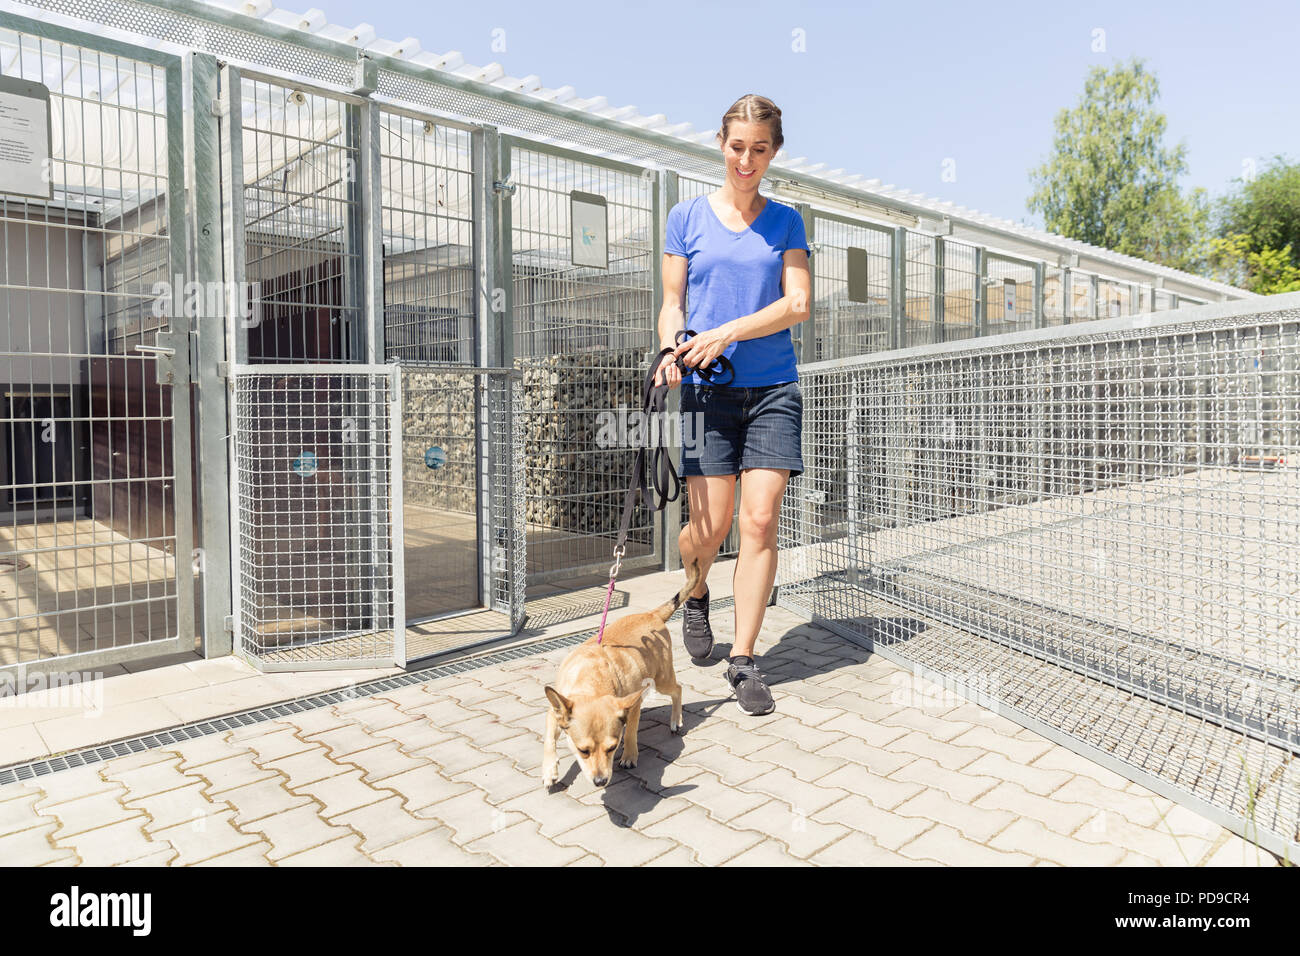 Woman walking a dog in animal shelter Stock Photo